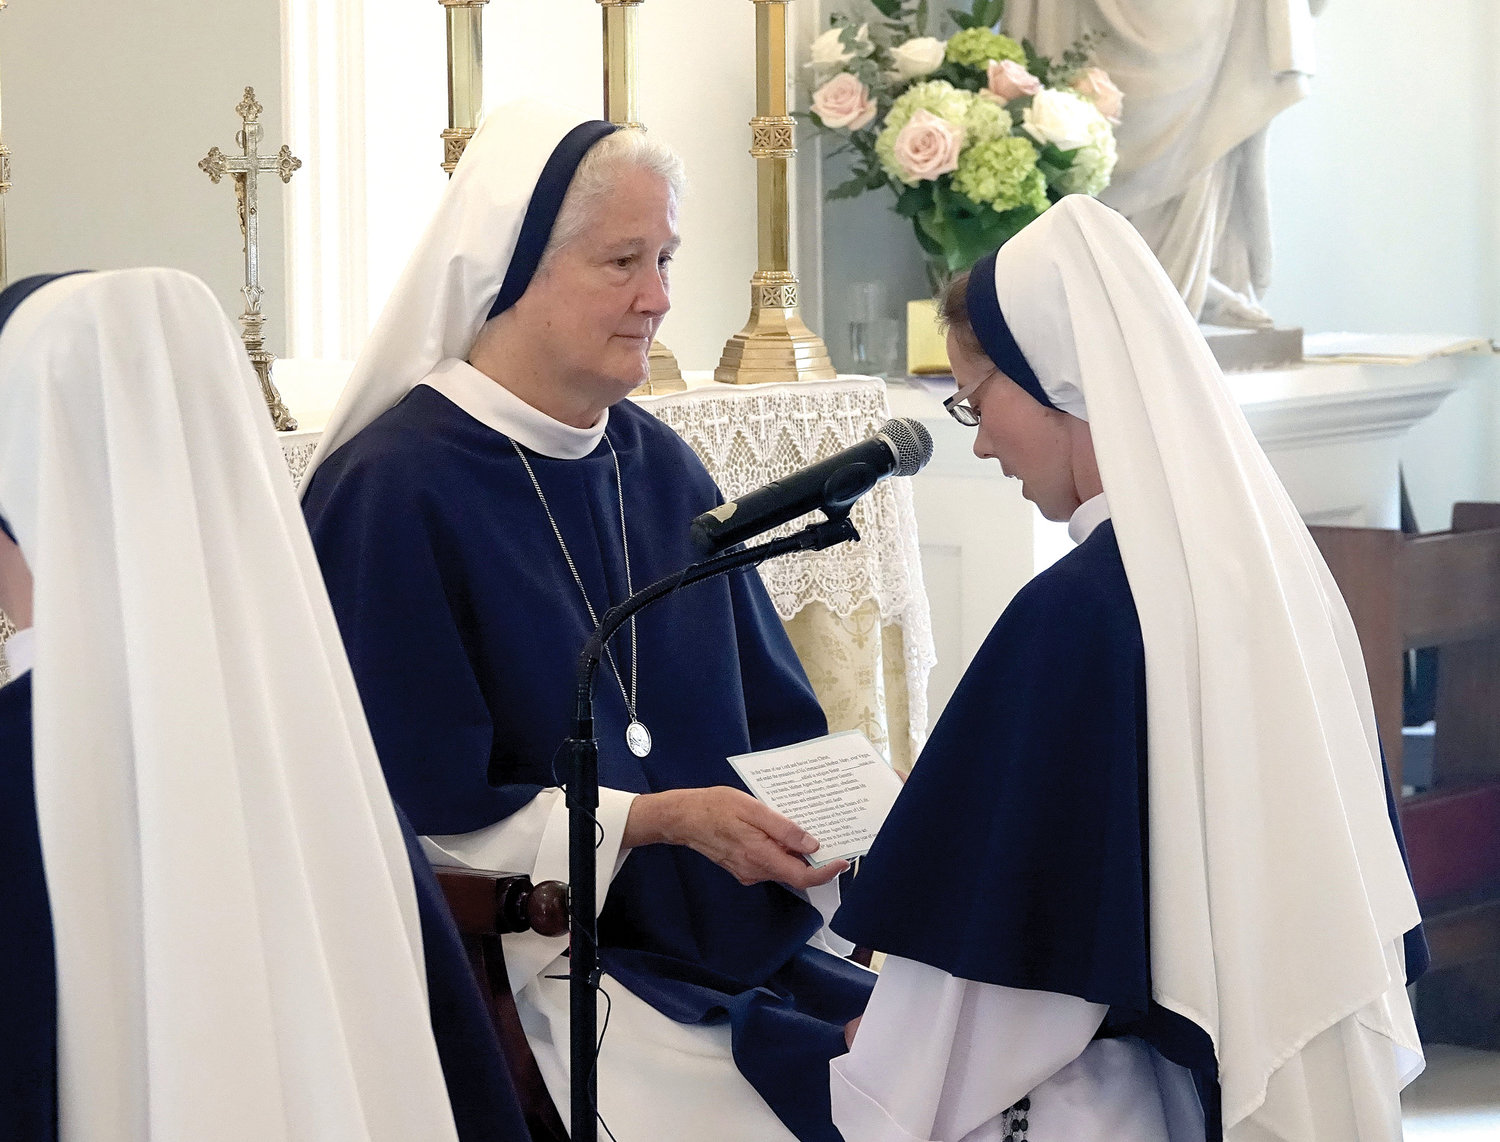 Sister Naomi Maria Magnificat, S.V., professes vows before Mother Agnes Mary Donovan, S.V., superior general of the Sisters of Life.